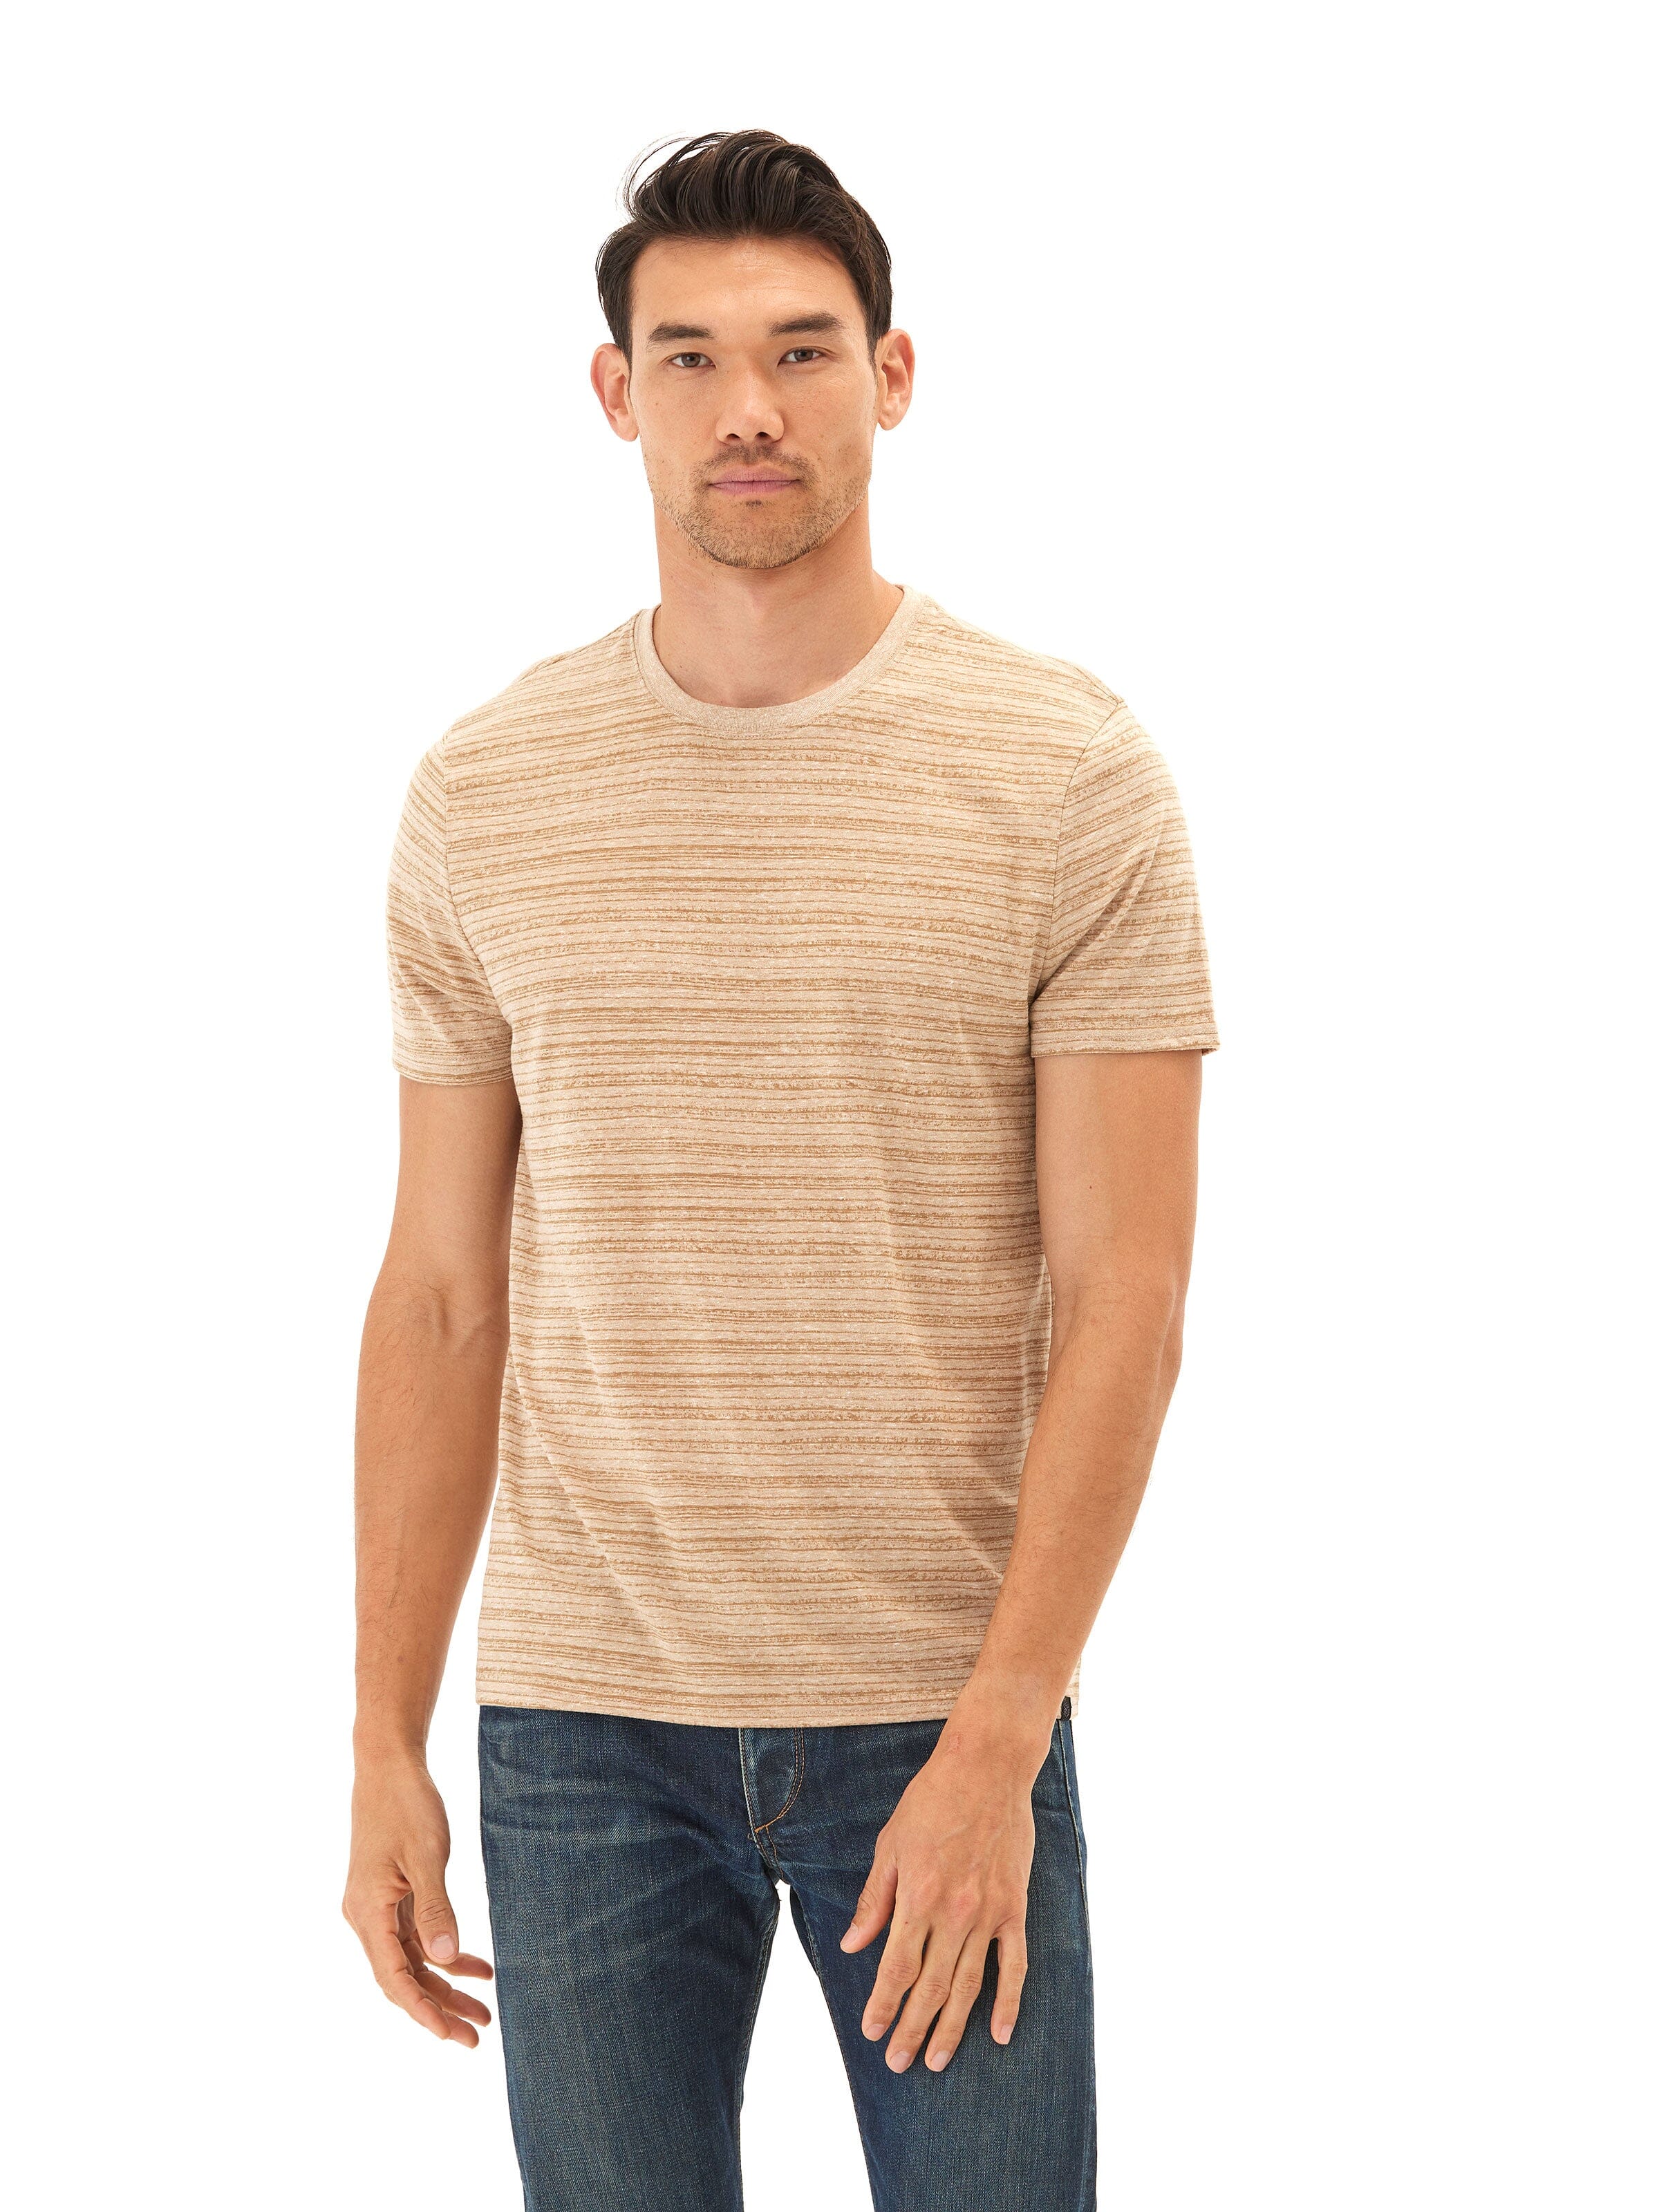 Stripe Triblend Jersey Crew Tee Mens Tops Tshirt Short Threads 4 Thought 